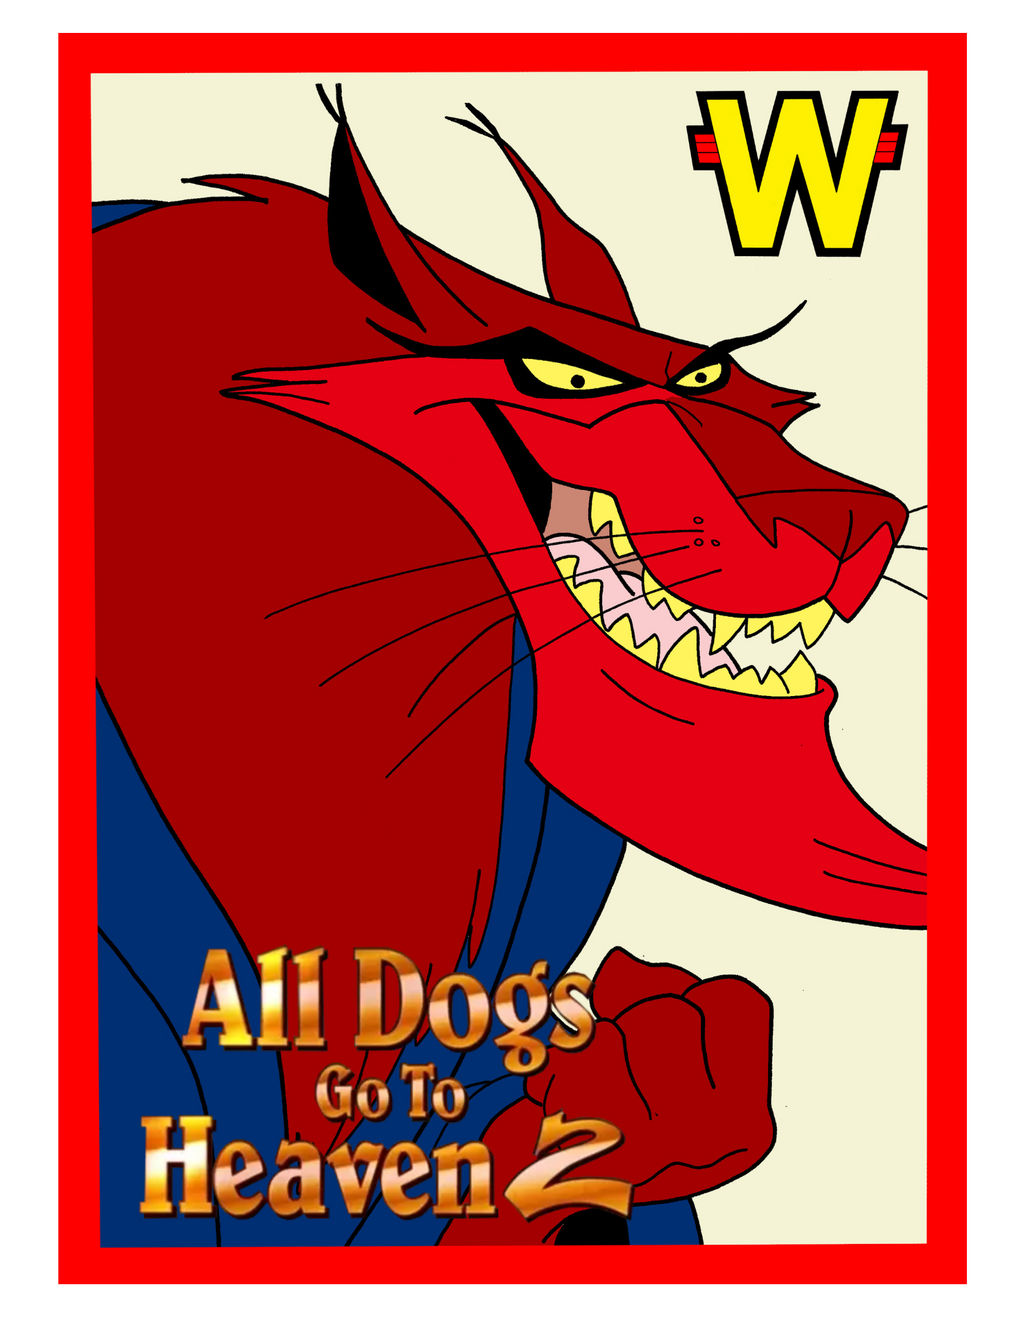 1996 Red From All Dogs Go To Heaven donandron on DeviantArt